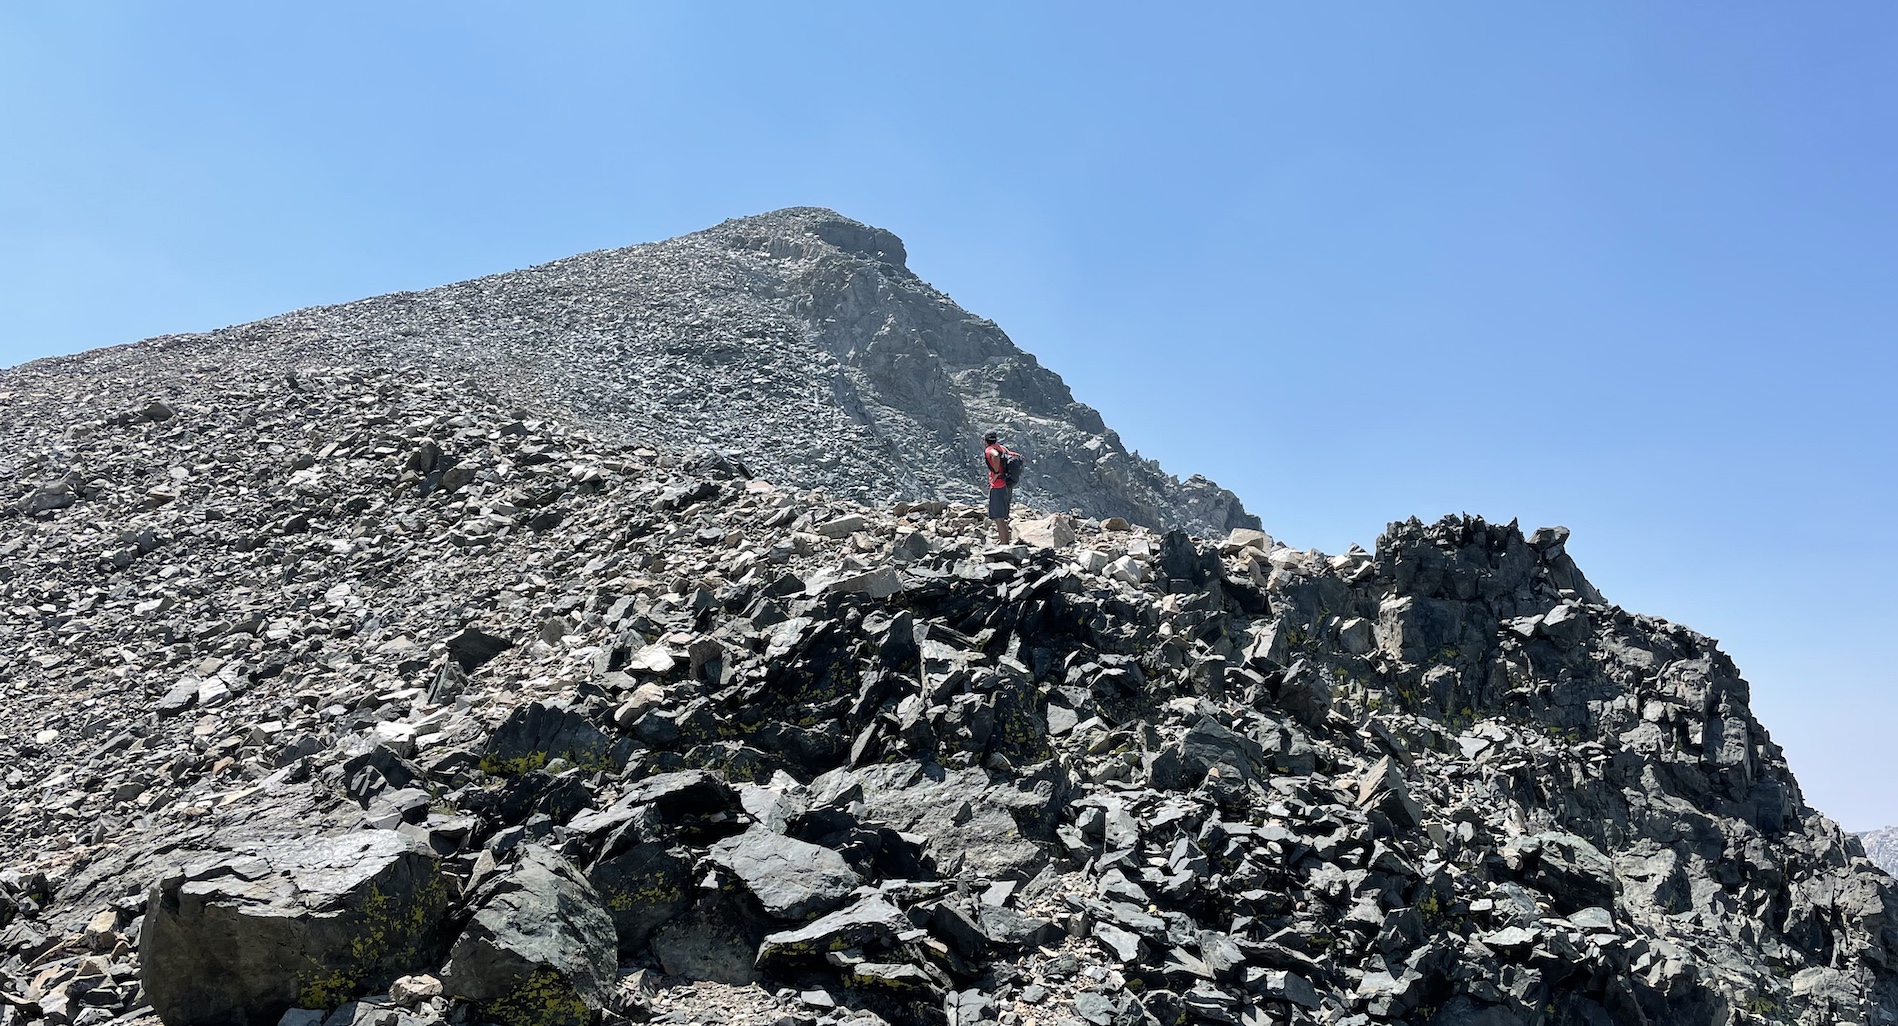 Rafee leaves the ridge and begins the last 500 vertical feet of easy talus to the summit.